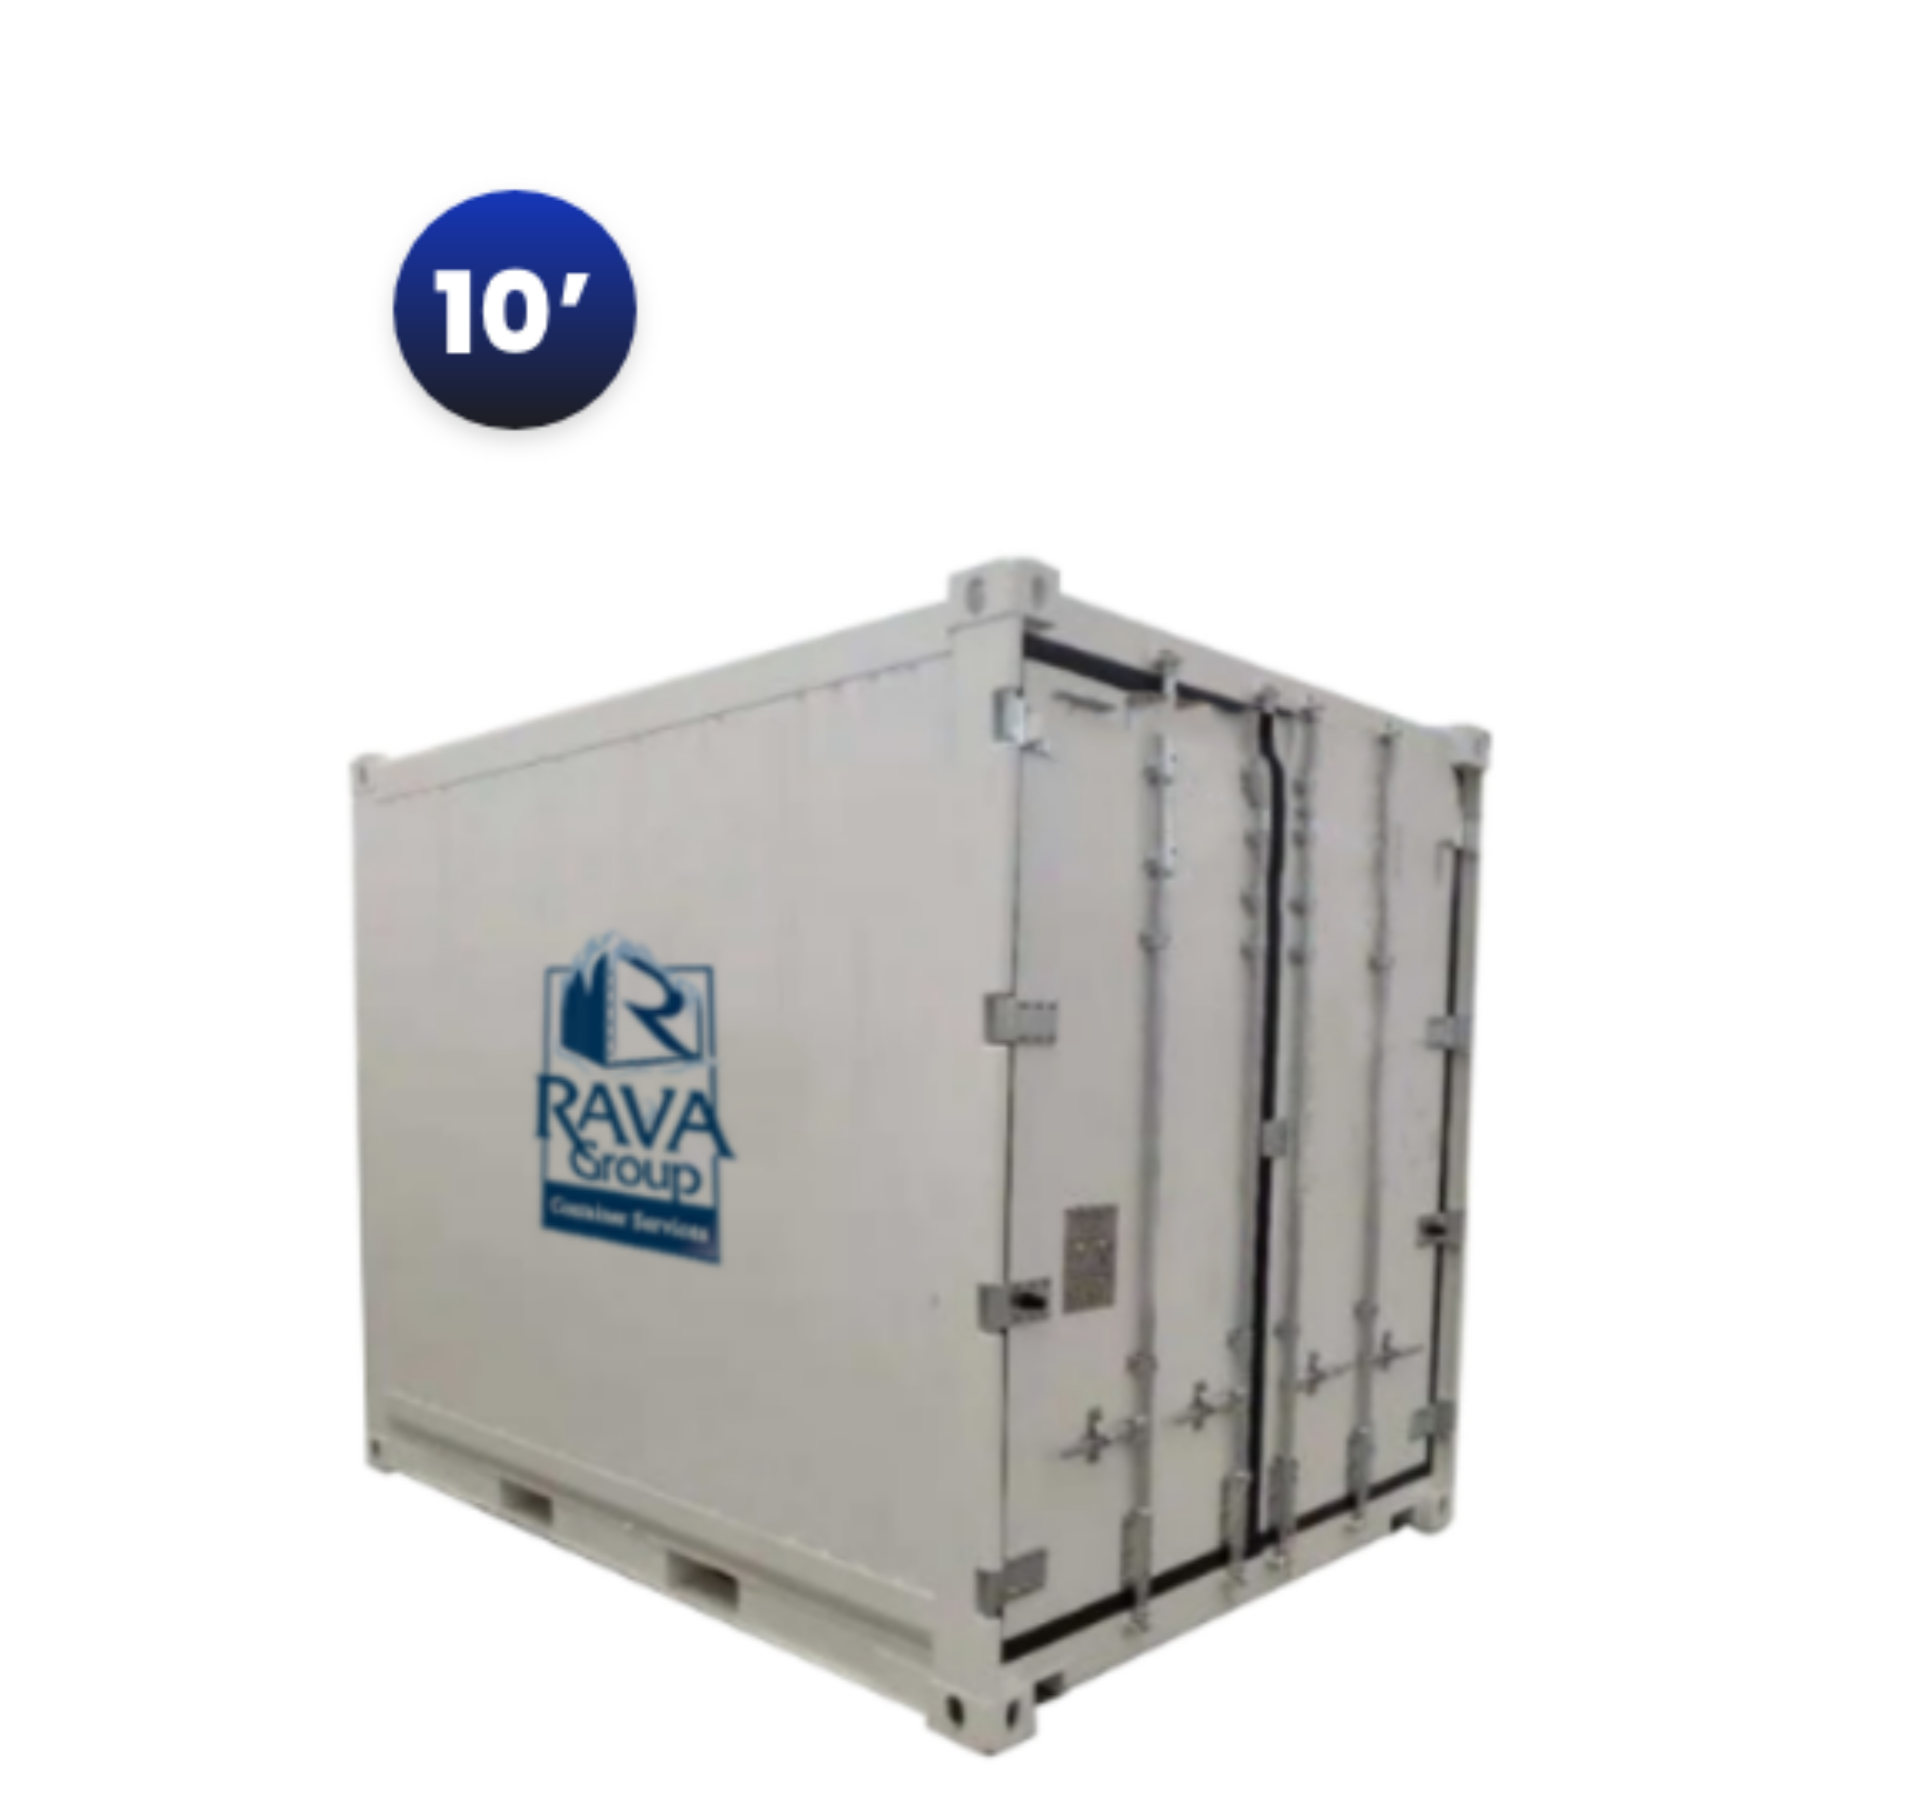 https://ravagroupcontainers.com/wp-content/uploads/2020/03/10standardsimple-e1628524602650-1920x1803.png